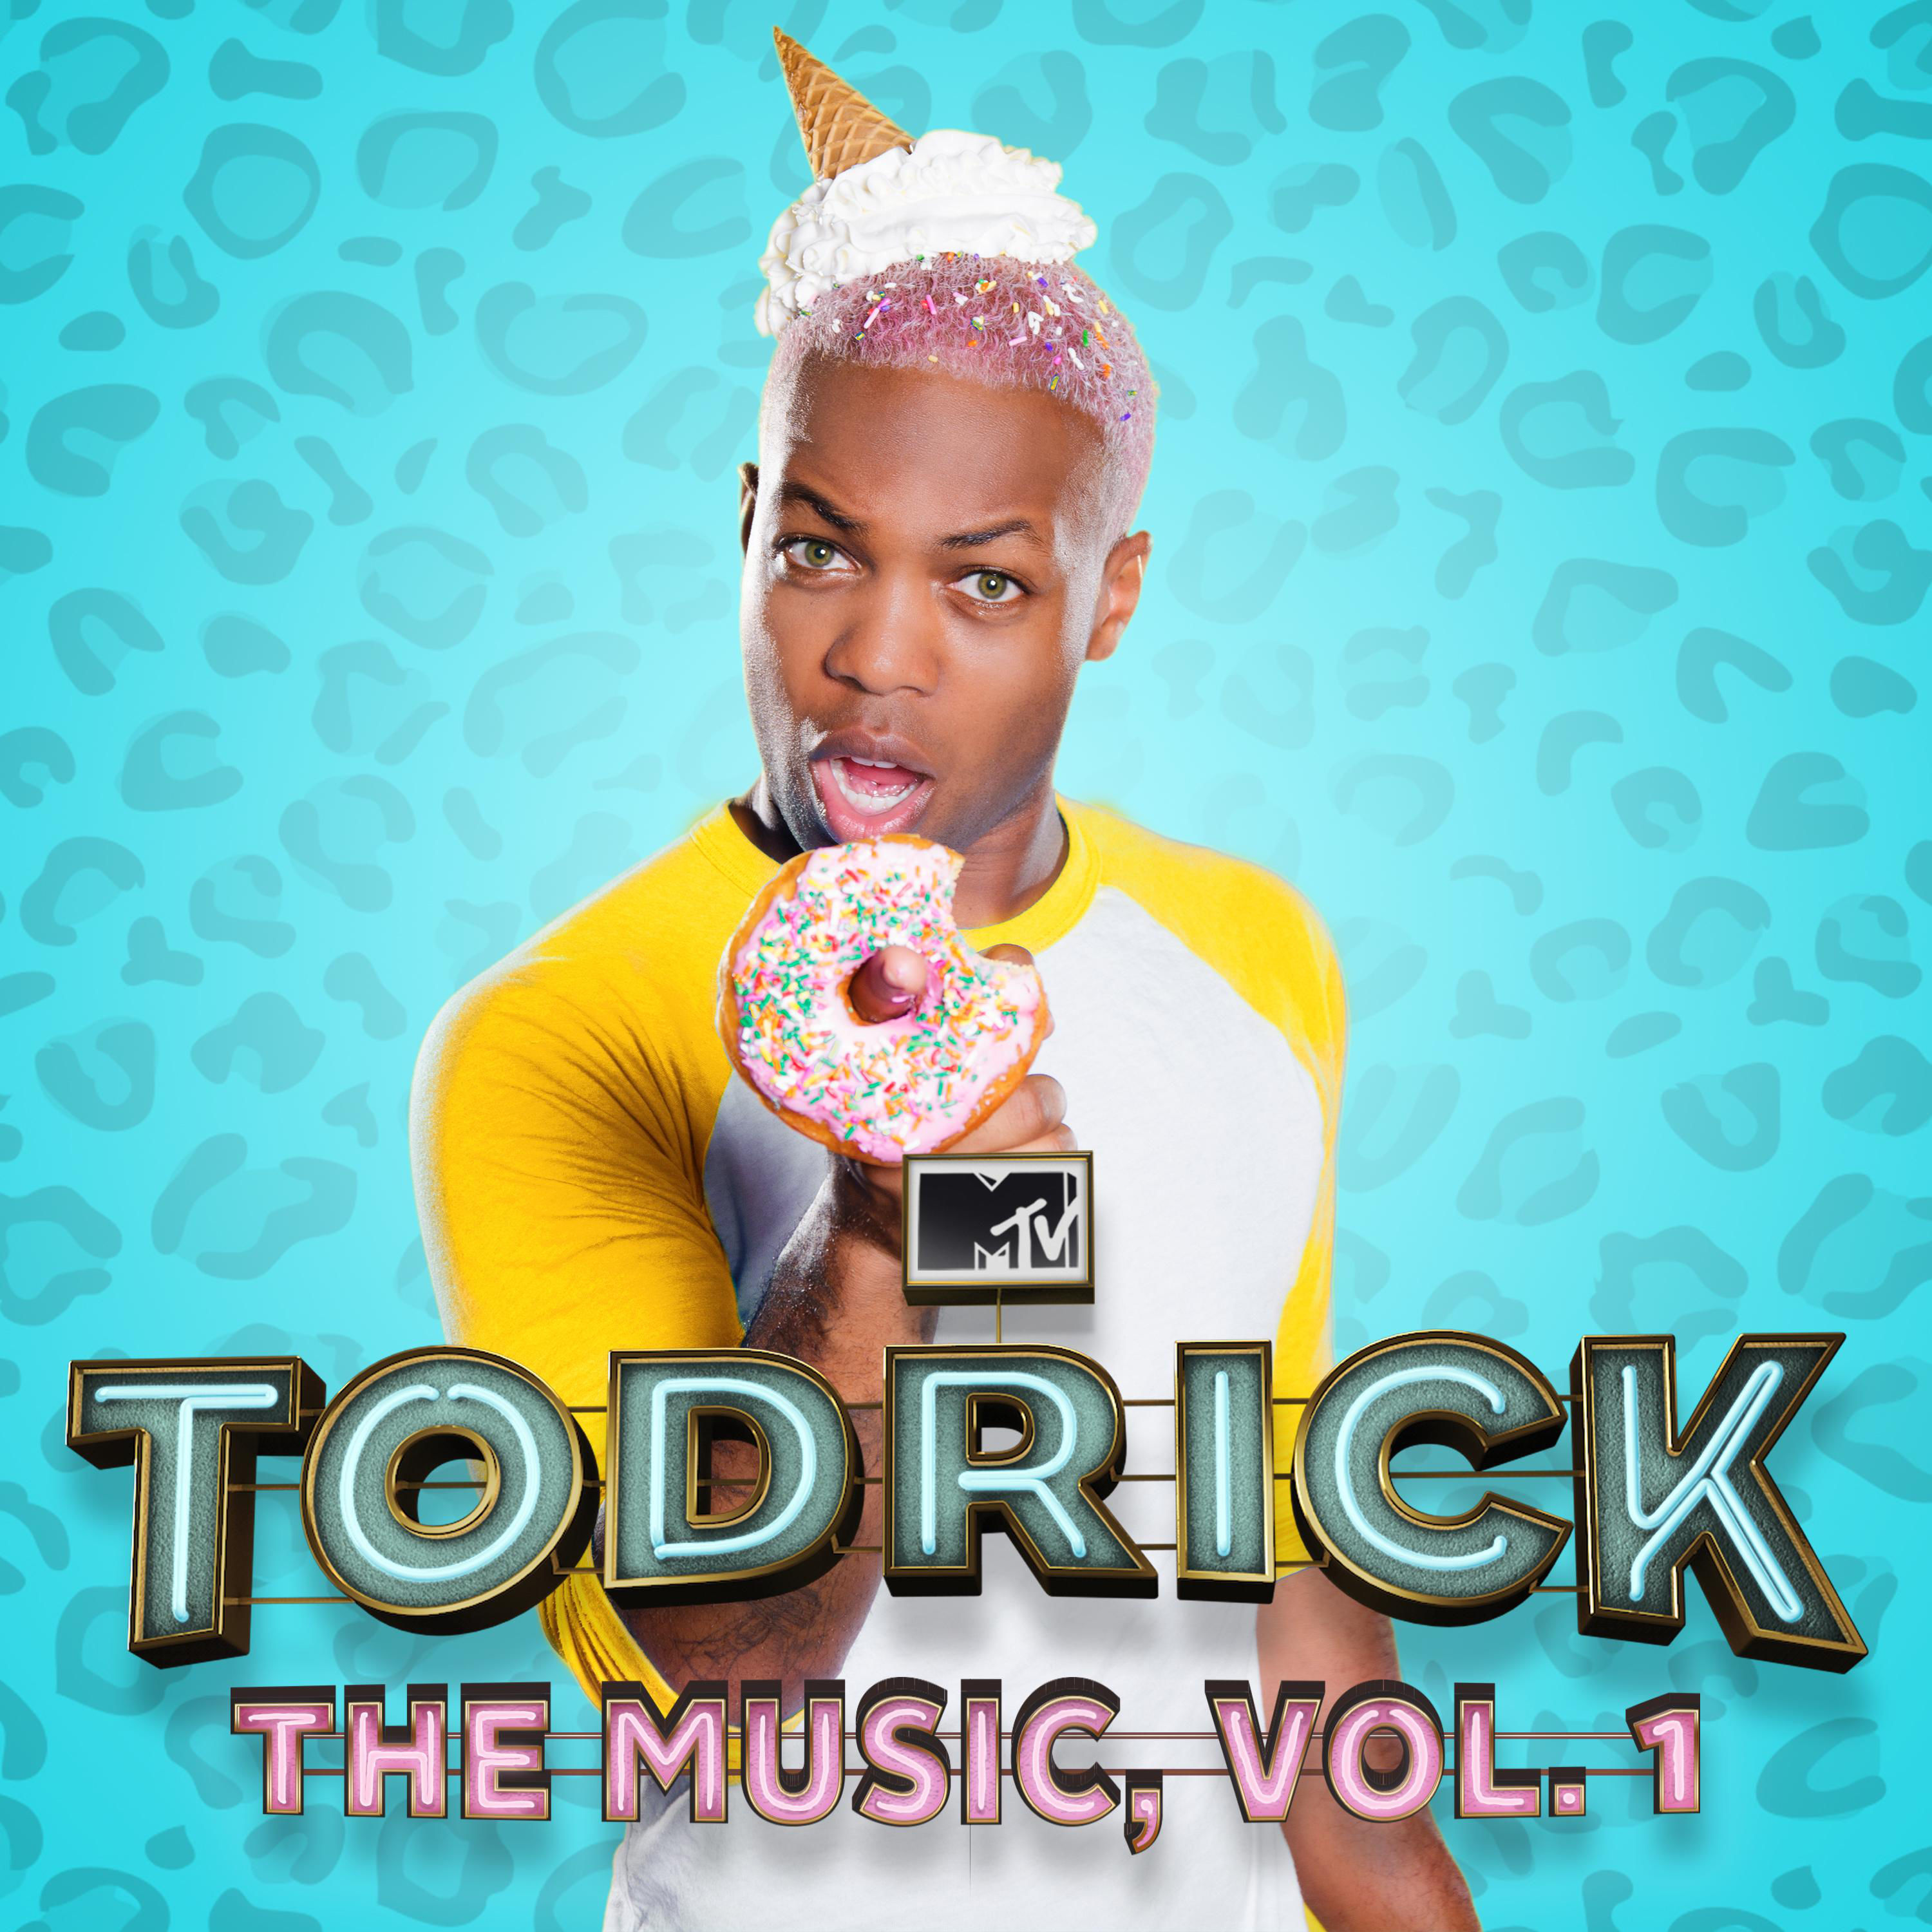 Who Let the Freaks Out by Todrick hall (즐거움 클럽 비트 흥함 토드릭 홀)